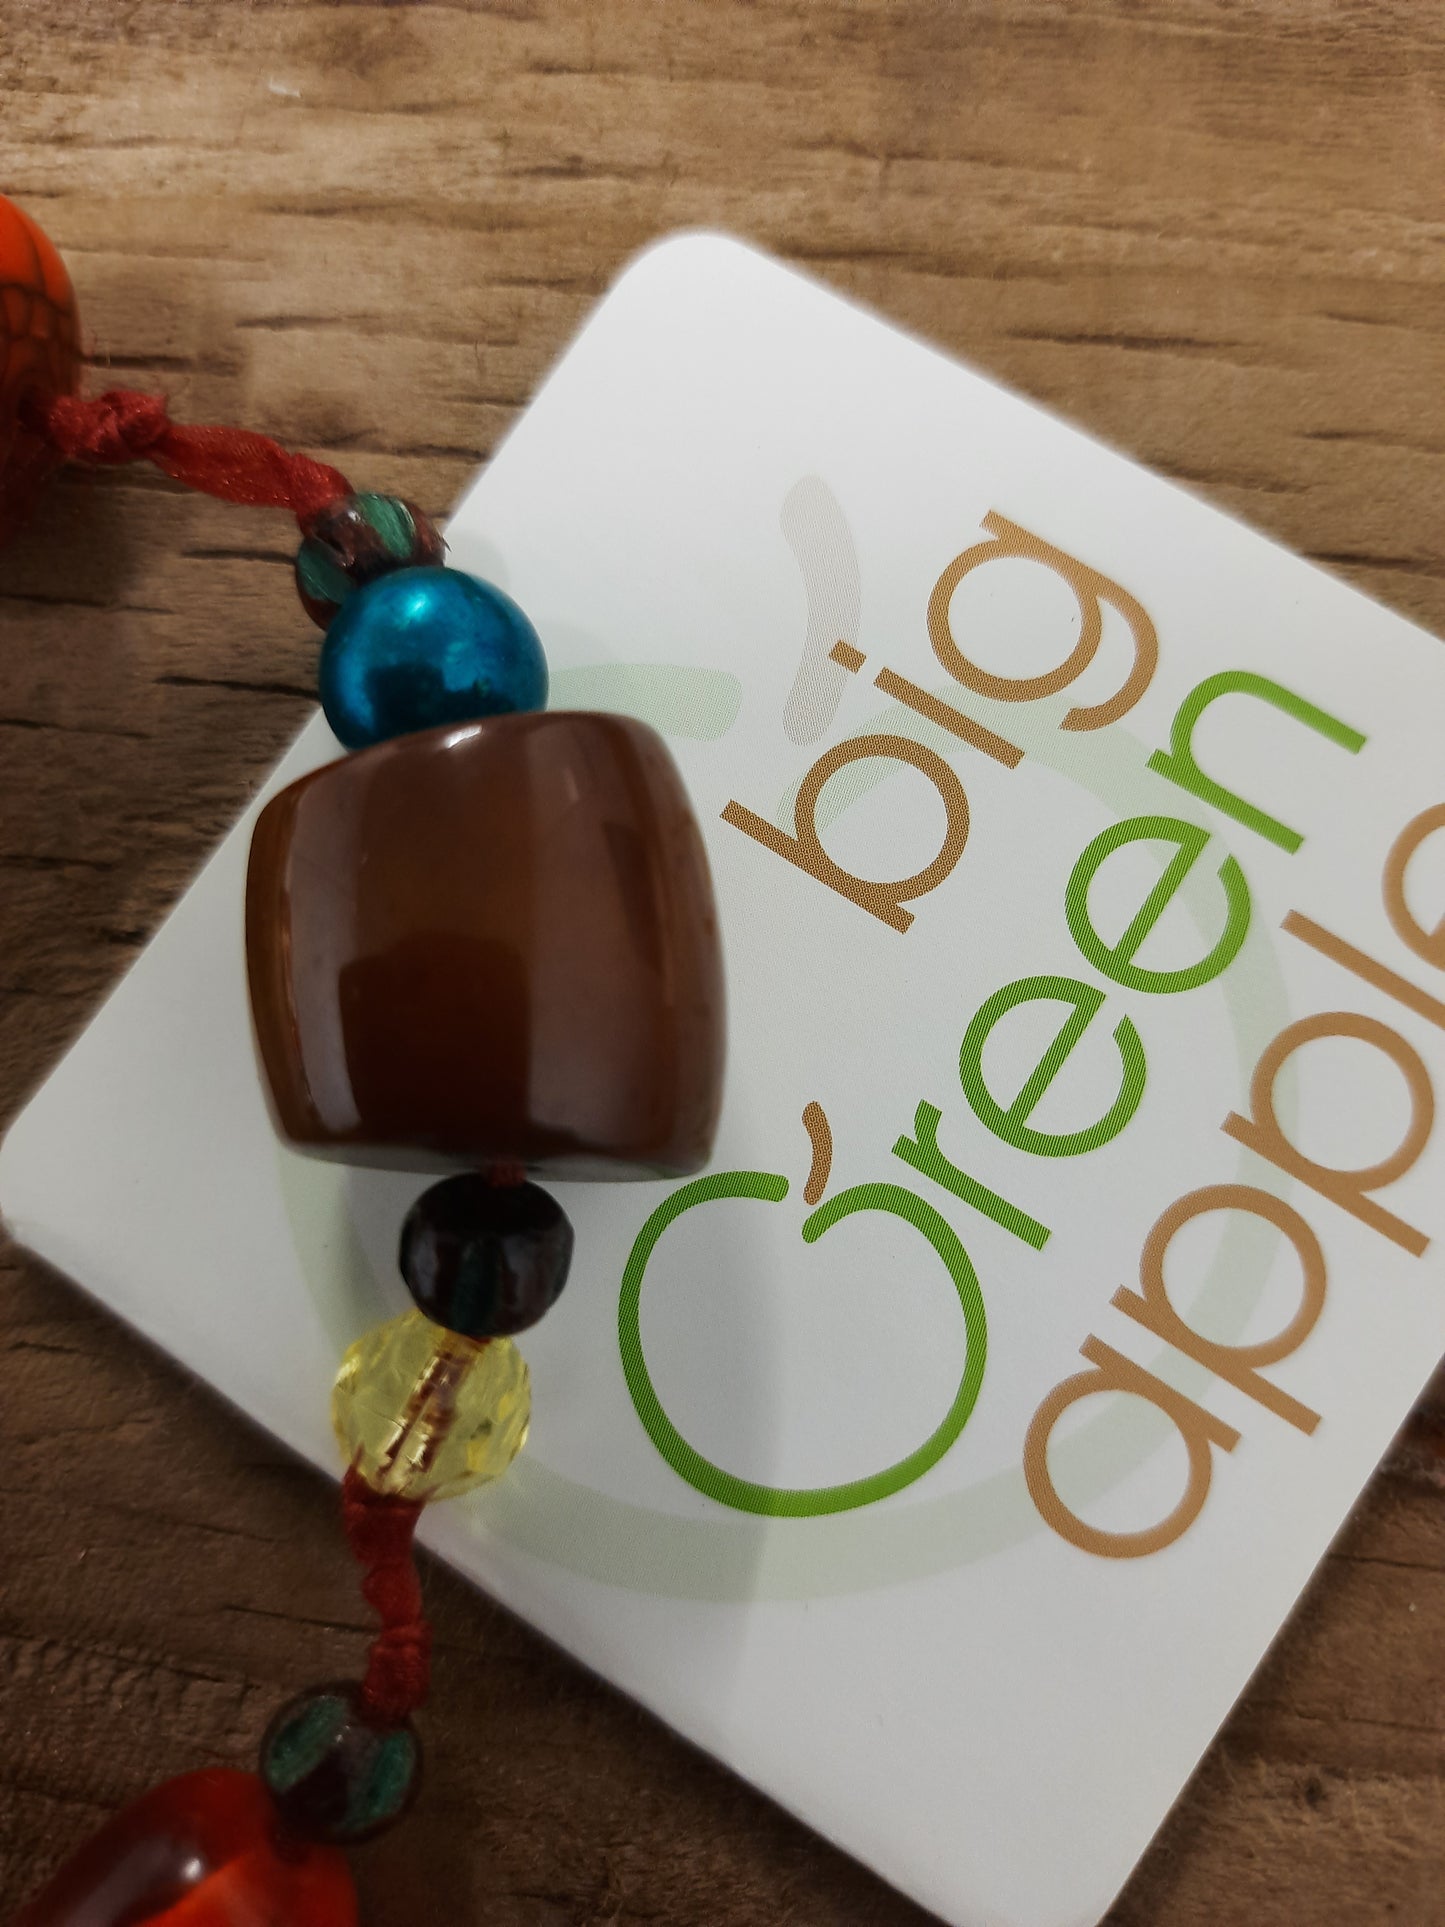 Necklaces, Eco Conscious, Sustainable Living, Ethical Online Living, Gifts For Her, BIG GREEN APPLE 